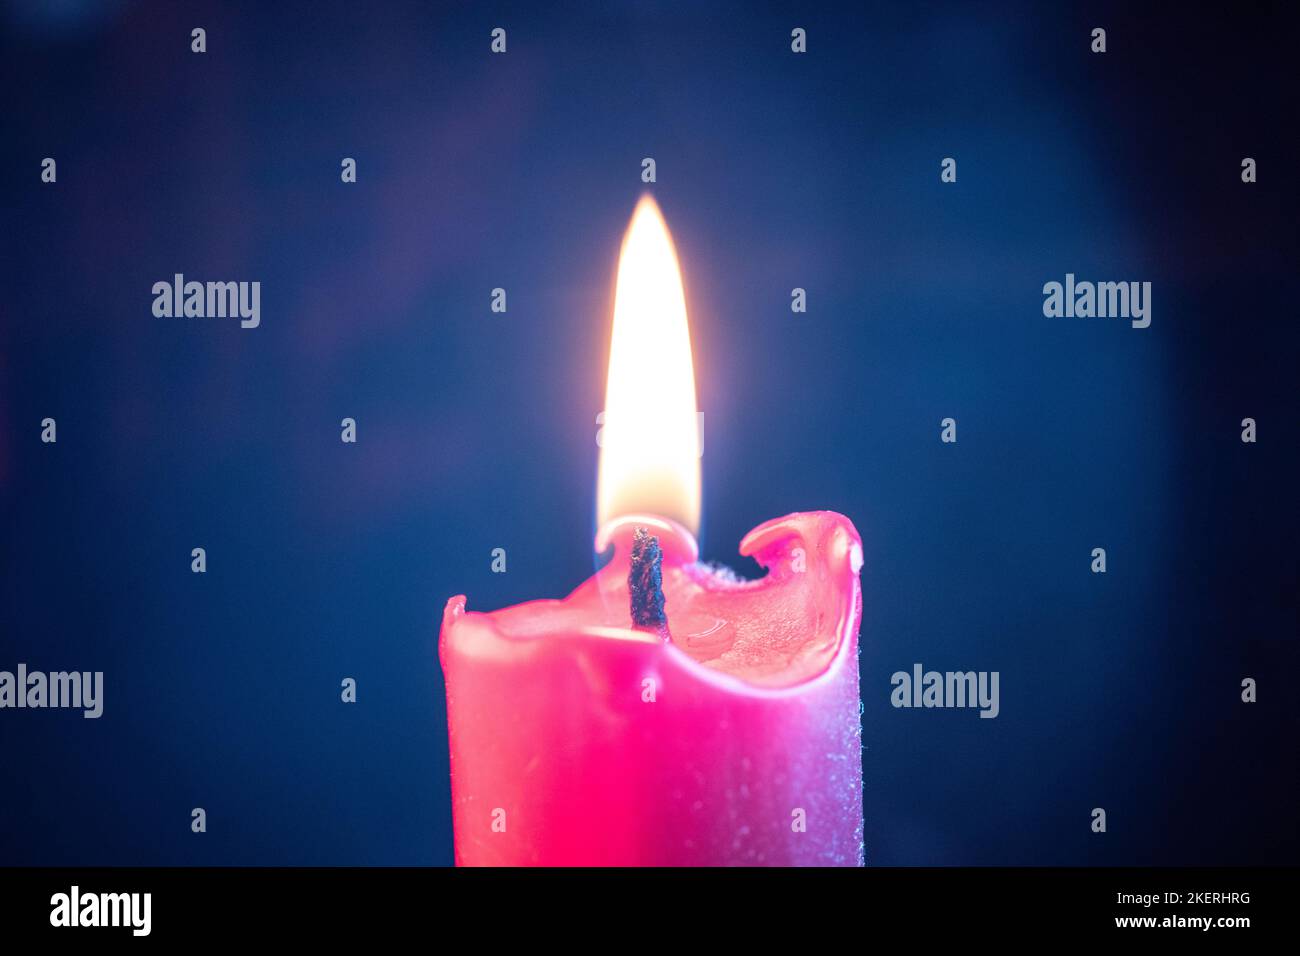 Candle flame flickers in the wind against a black background Stock Photo